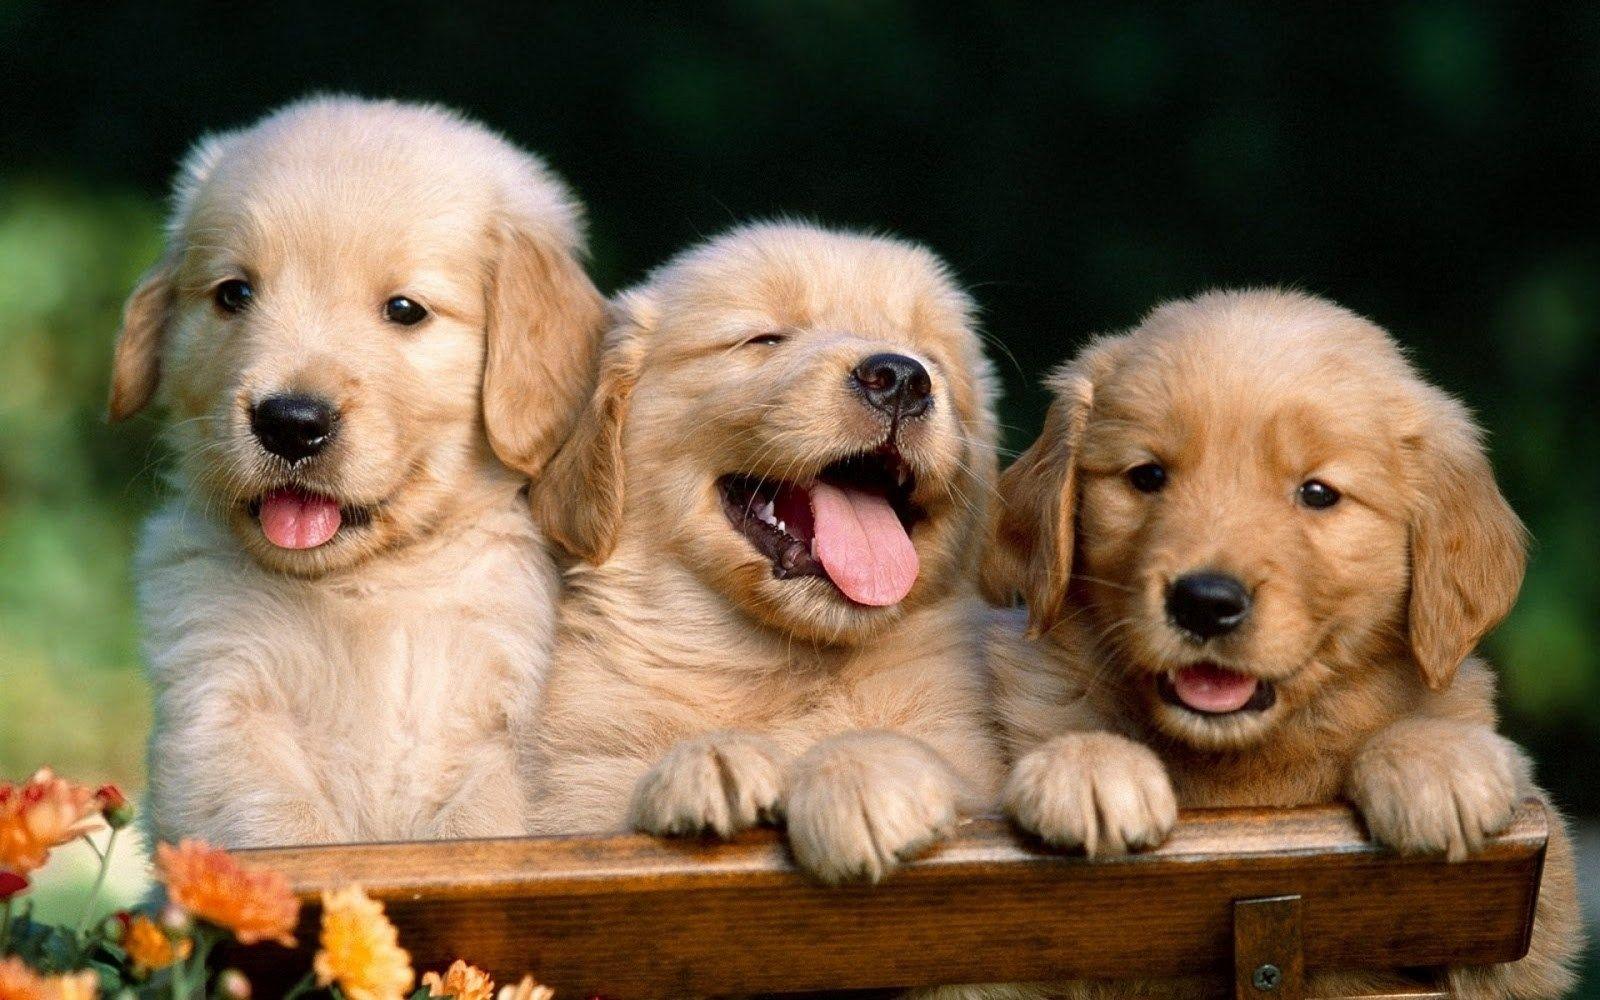 Cute Puppies Photo Dog Wallpaper Background. Dogs Wallpaper